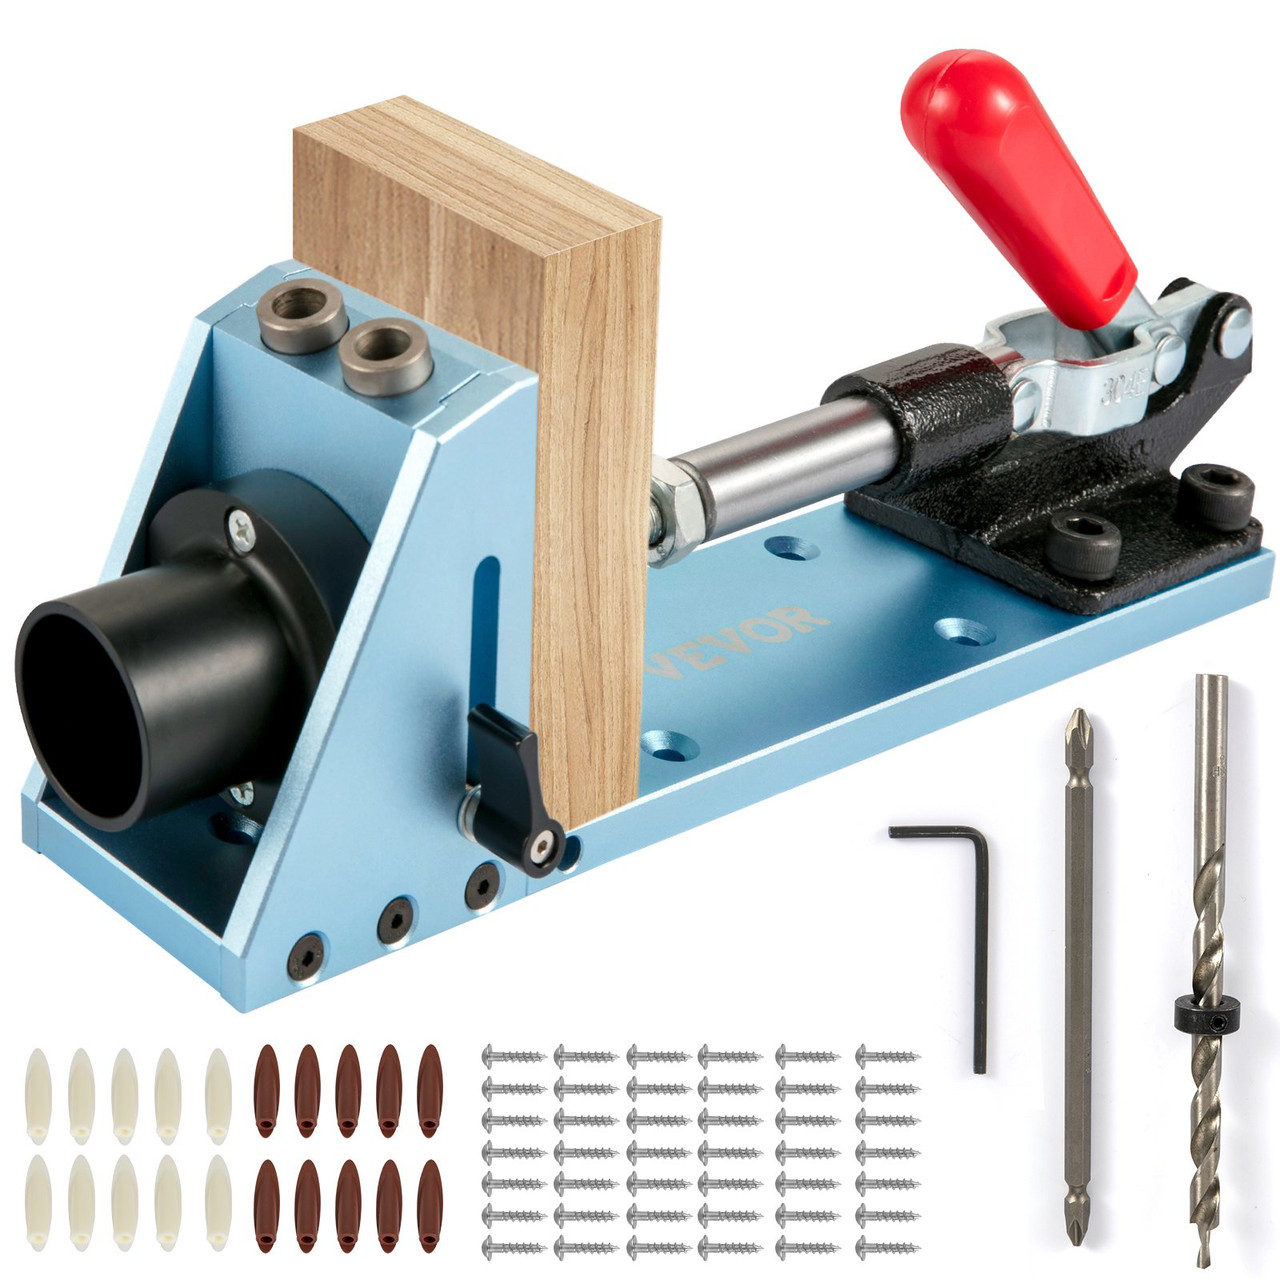 Pocket Hole Jig Kit, M4 Adjustable & Easy to Use Joinery Woodworking  System, Aluminum Punch Locator